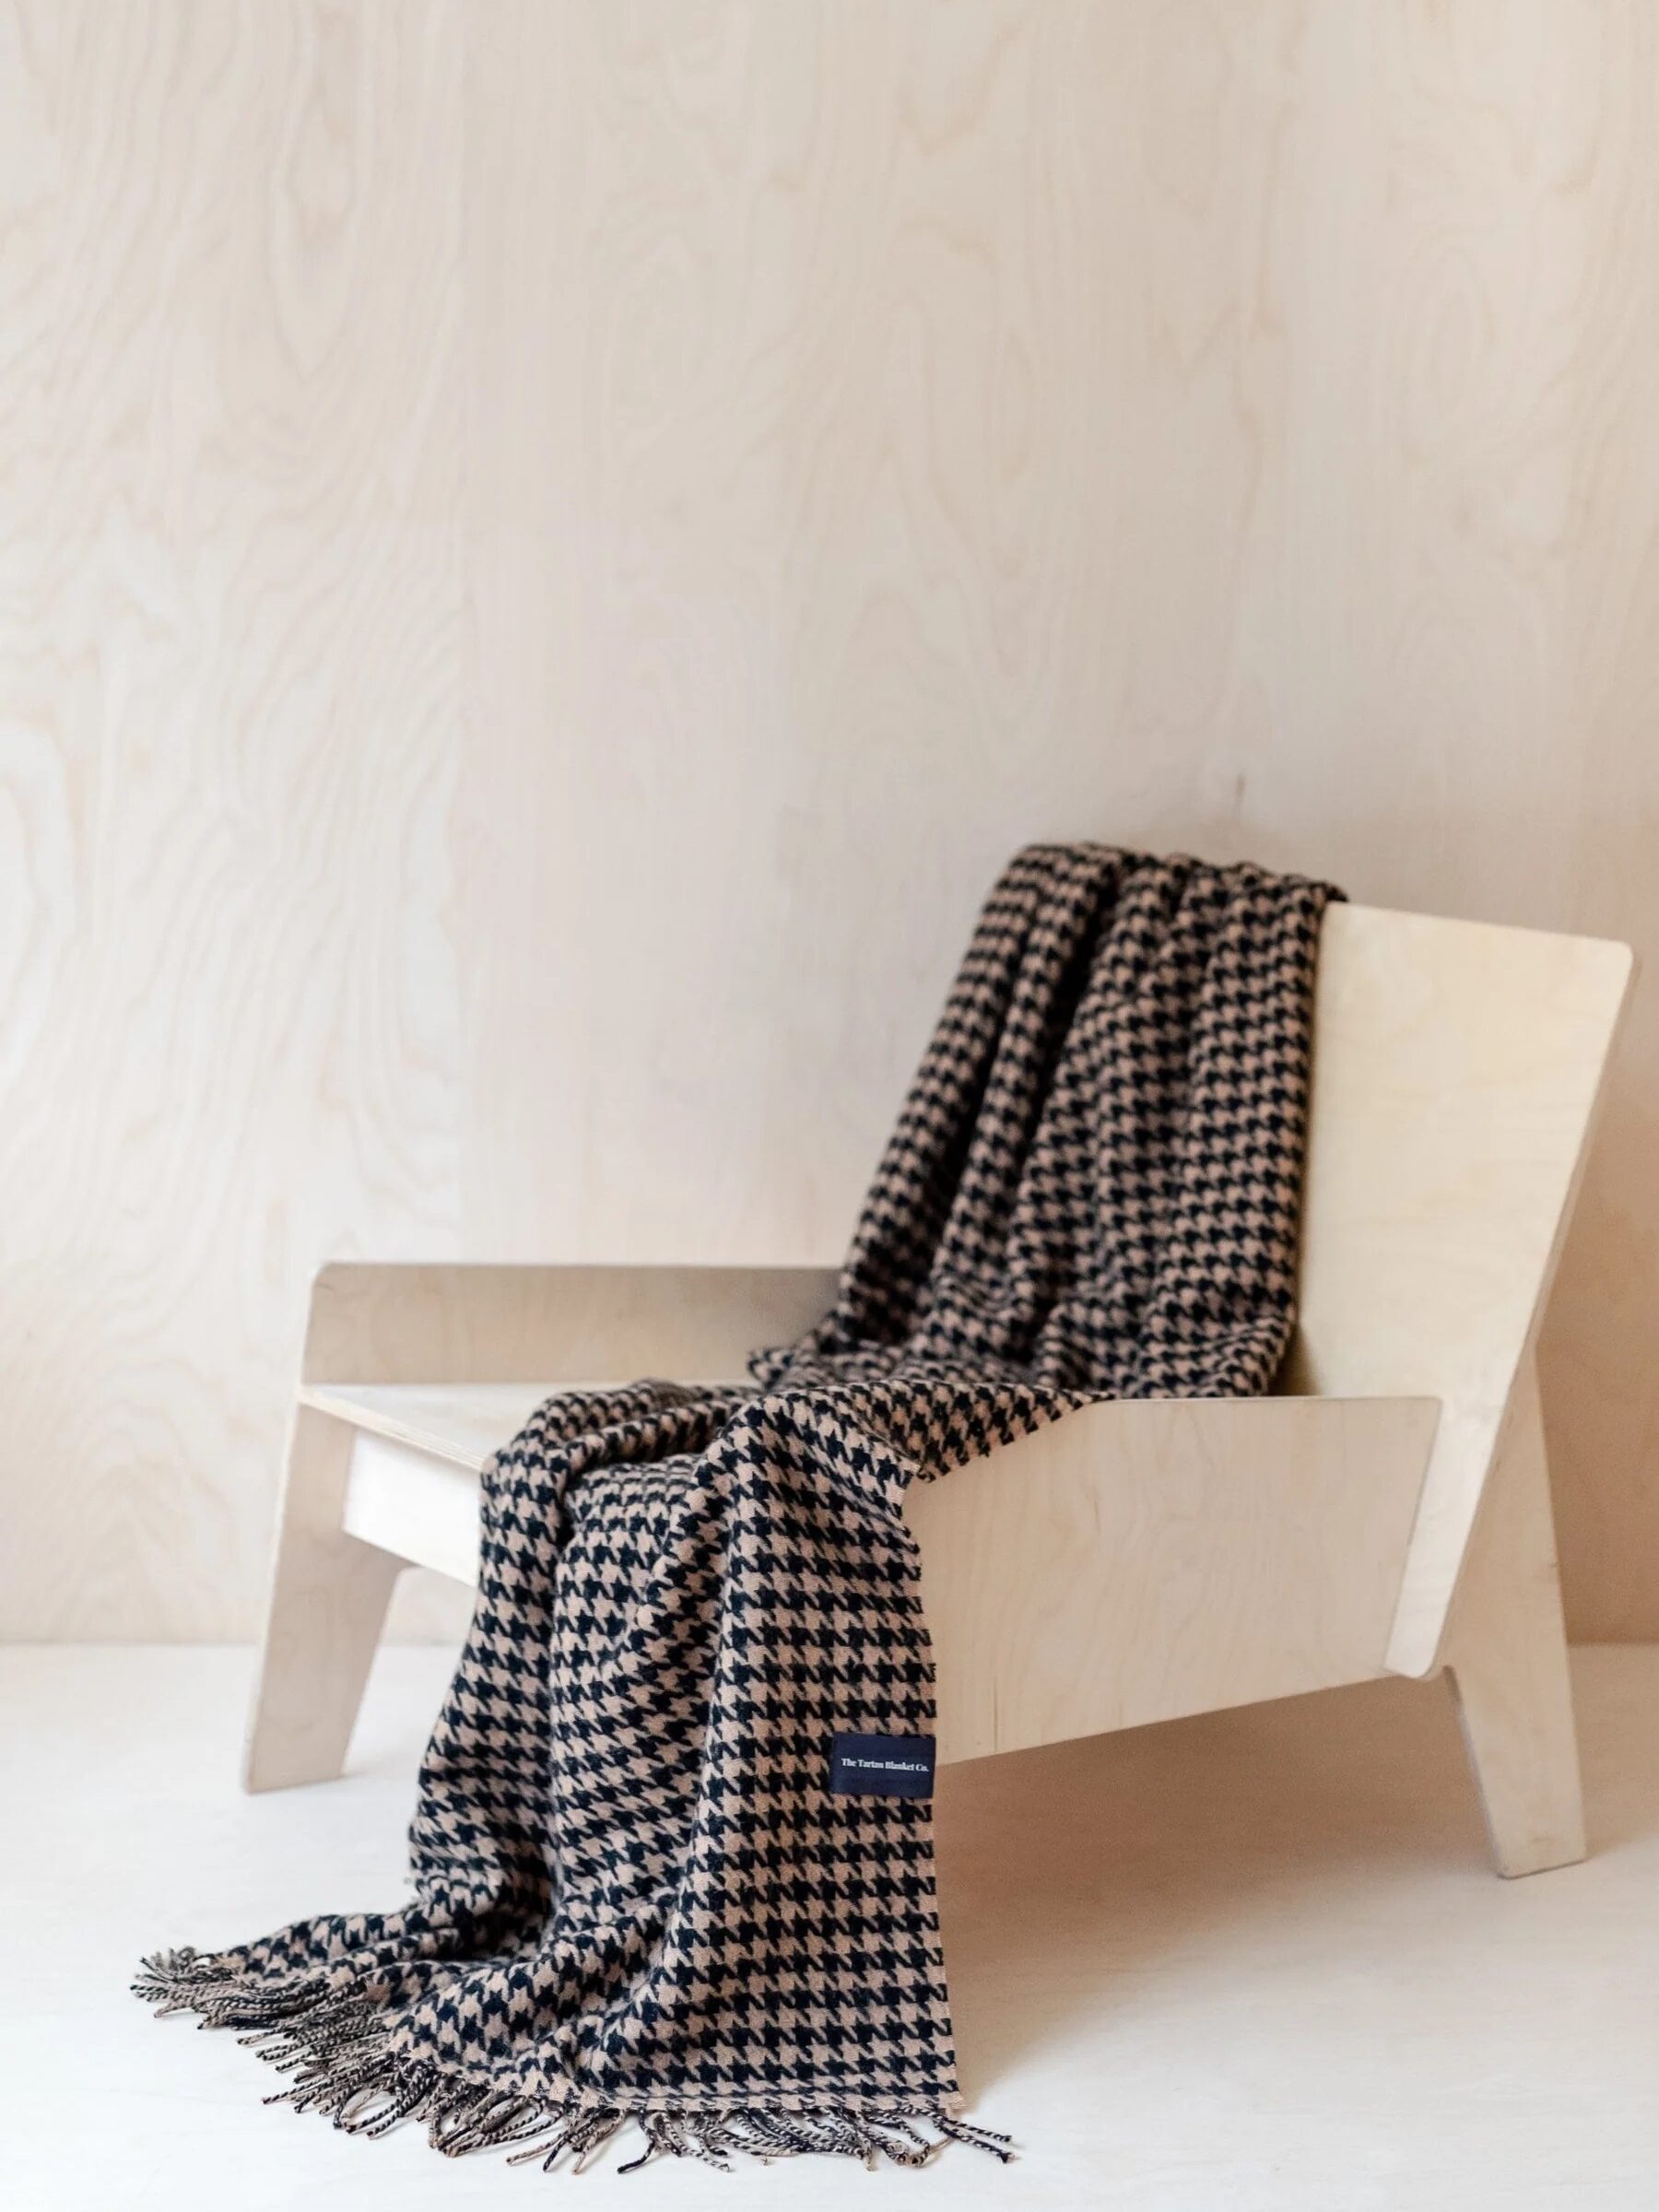 A wooden chair with a black-and-white houndstooth patterned blanket draped over it, set against a light wood-paneled wall.